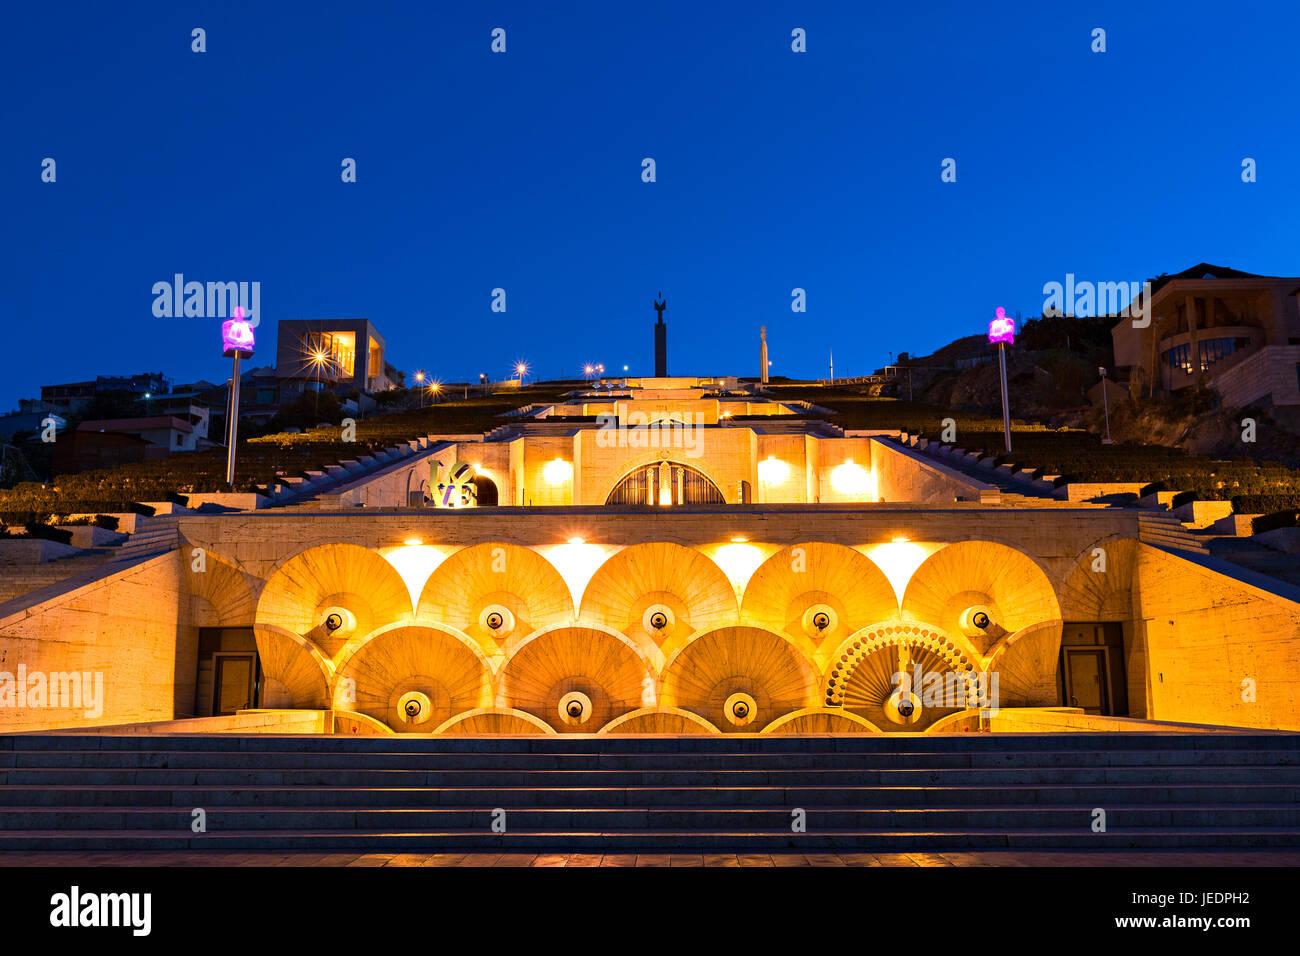 Built structure with stairways known as Cascade in Yerevan, Armenia. Stock Photo